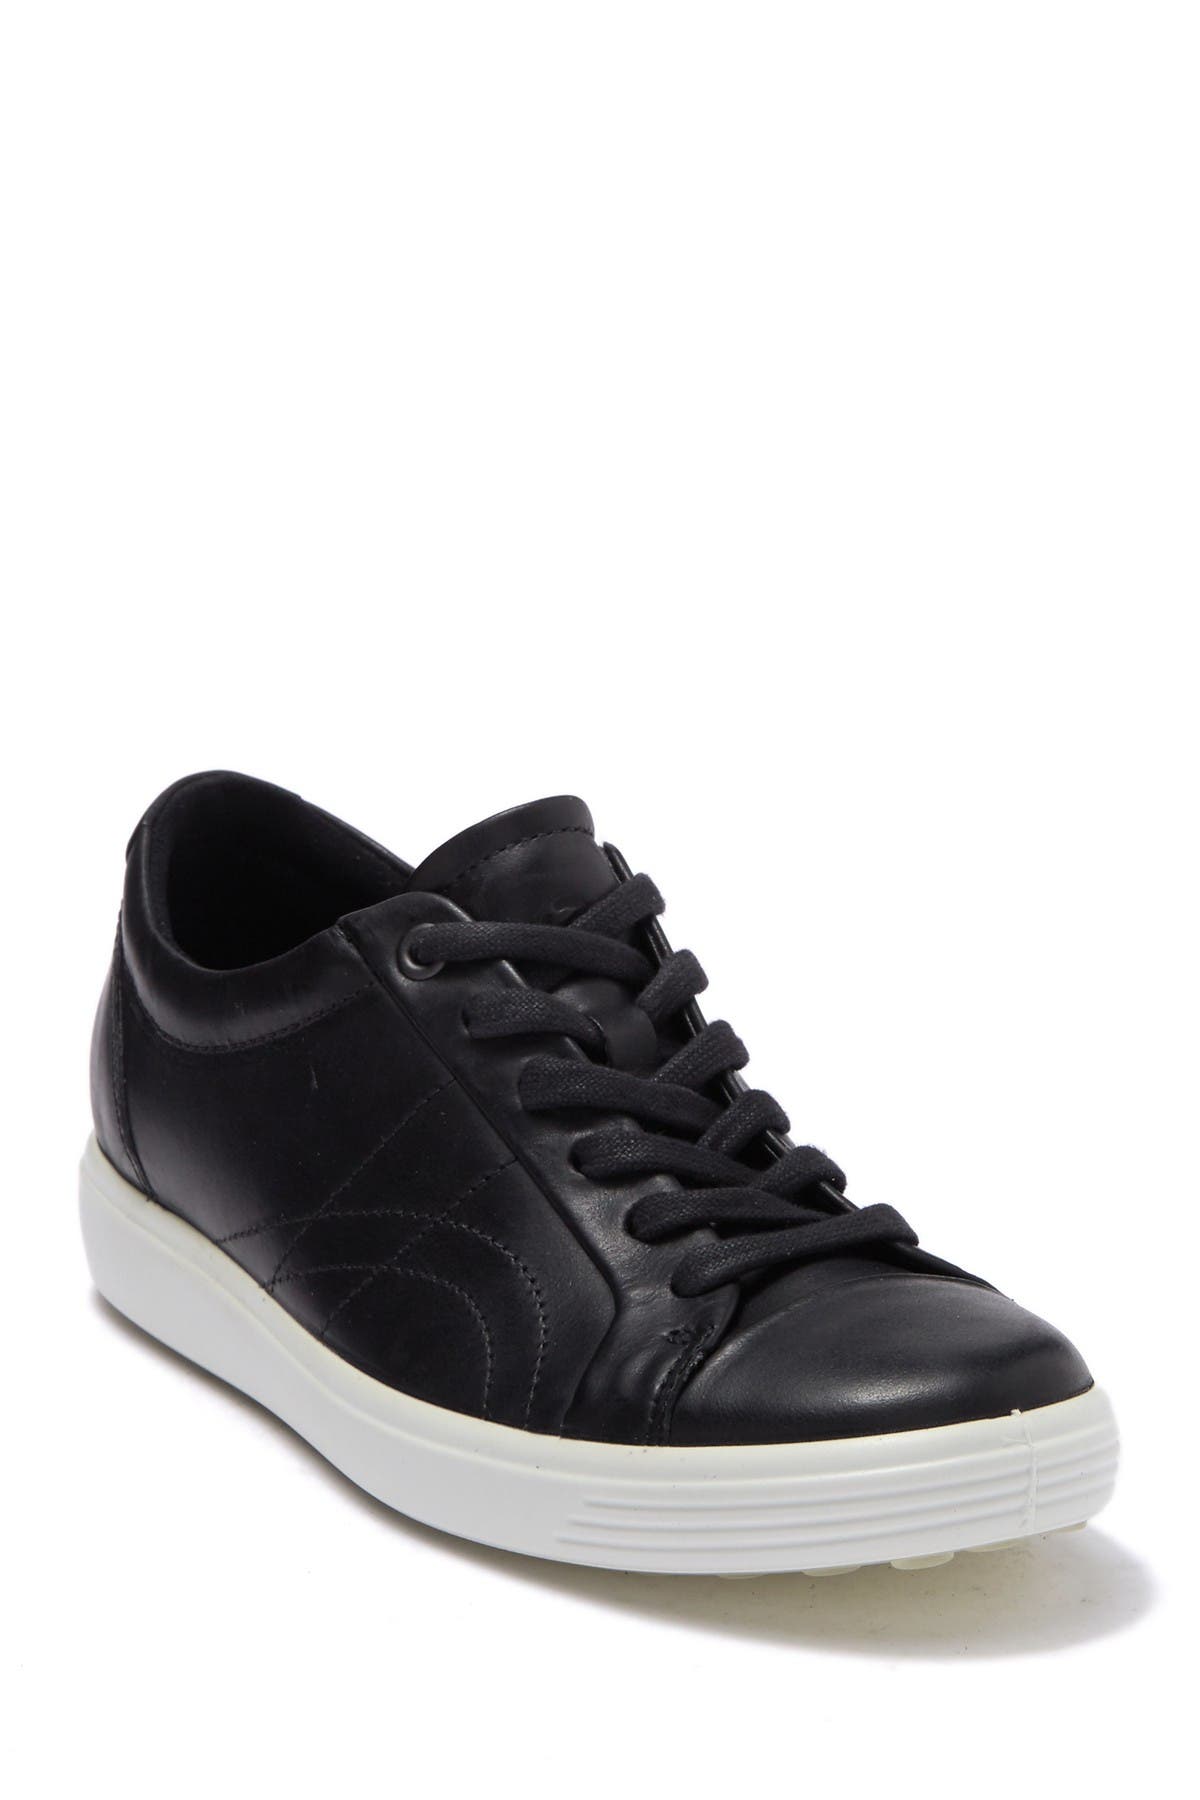 ecco soft 7 leather sneakers